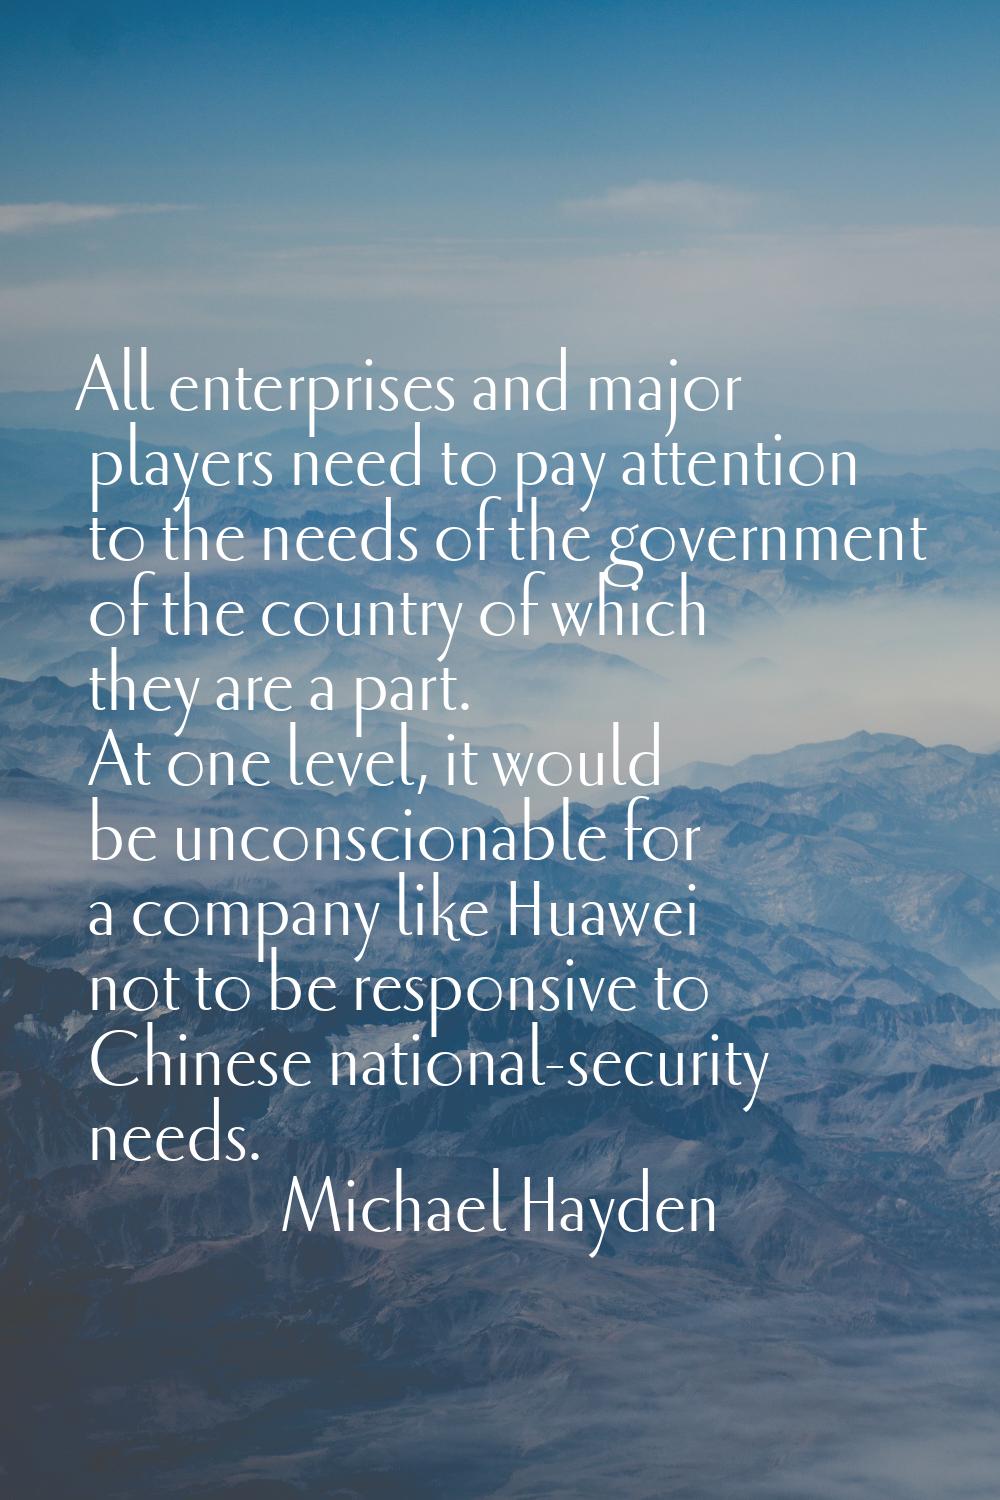 All enterprises and major players need to pay attention to the needs of the government of the count